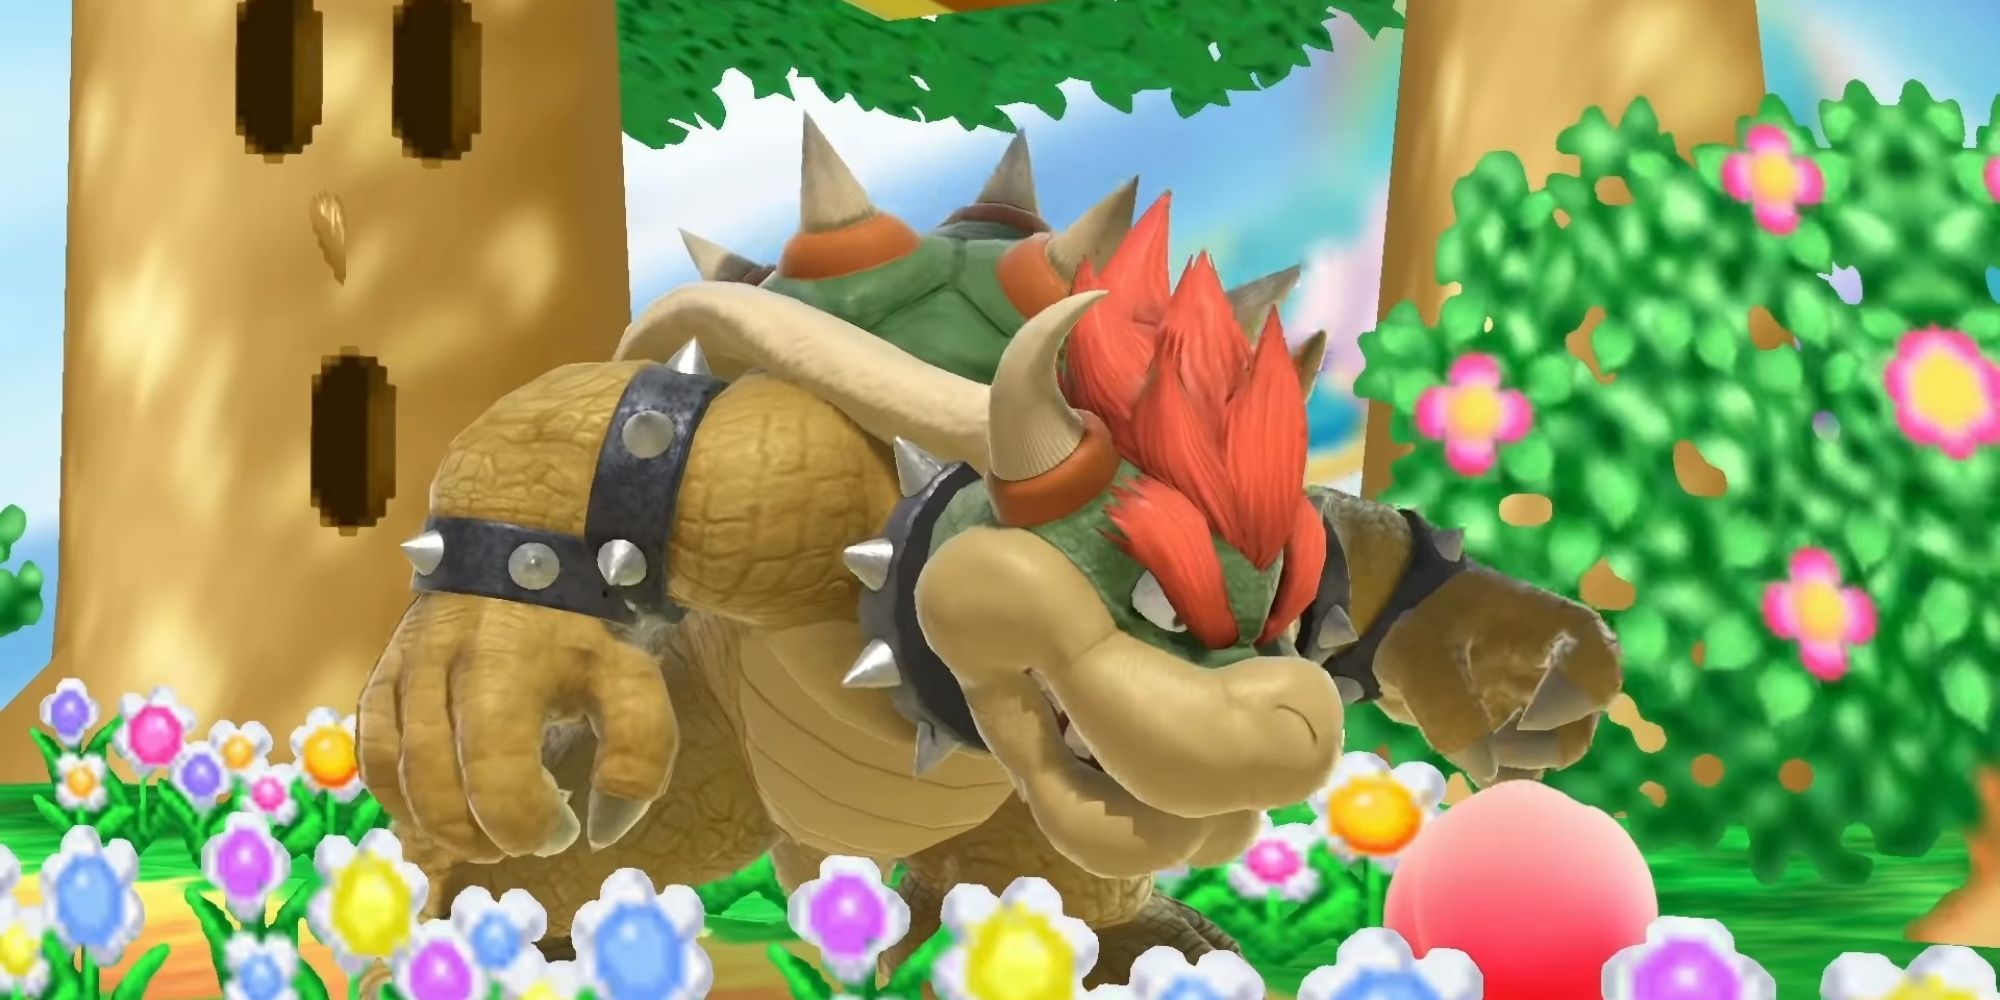 Bowser at the Dreamland stage in Super Smash Bros. Ultimate